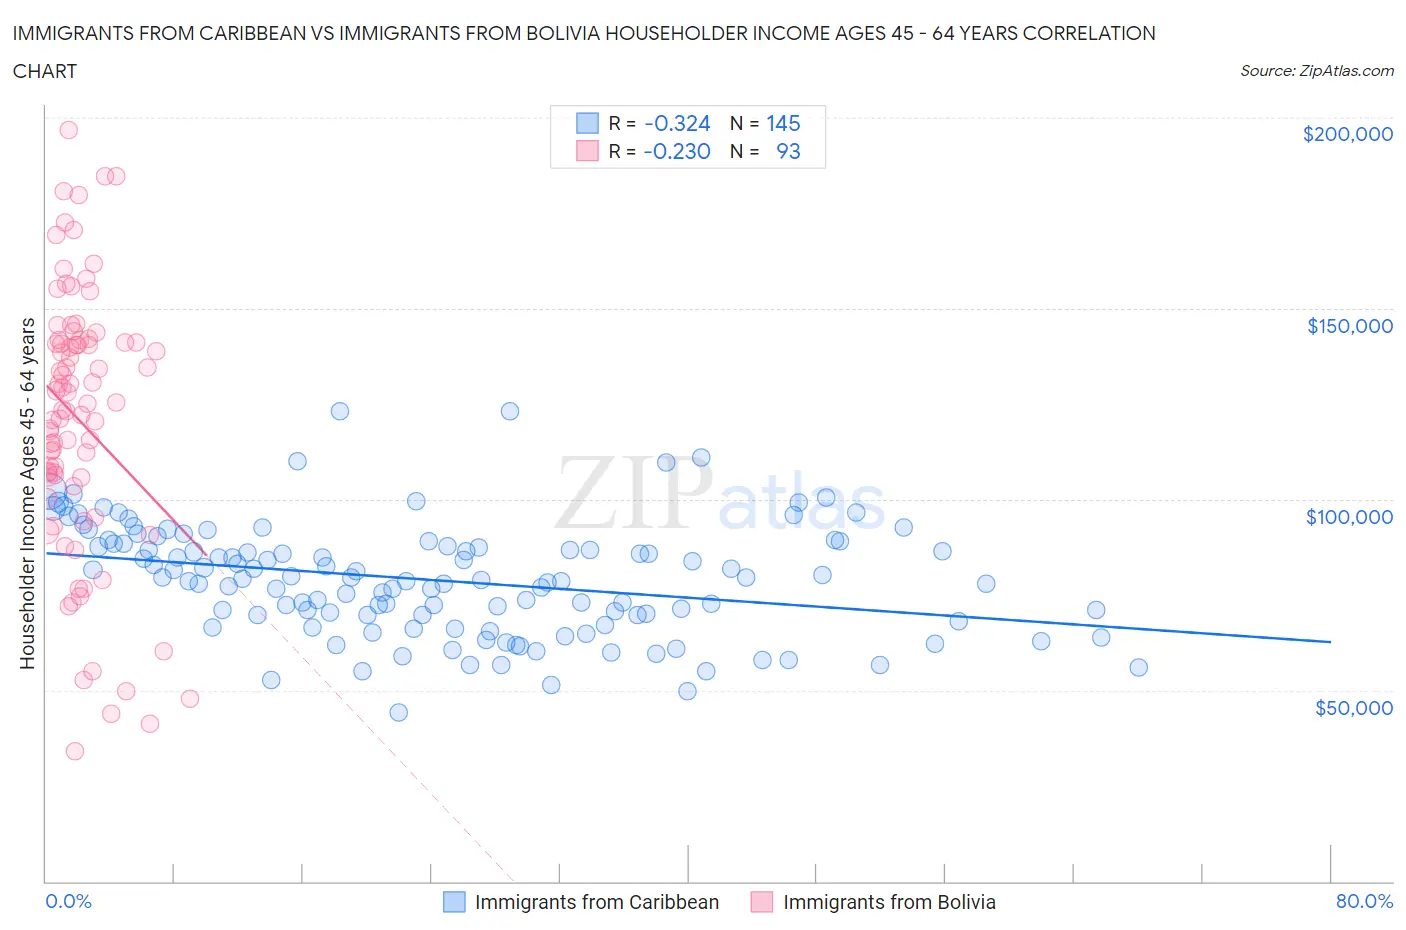 Immigrants from Caribbean vs Immigrants from Bolivia Householder Income Ages 45 - 64 years